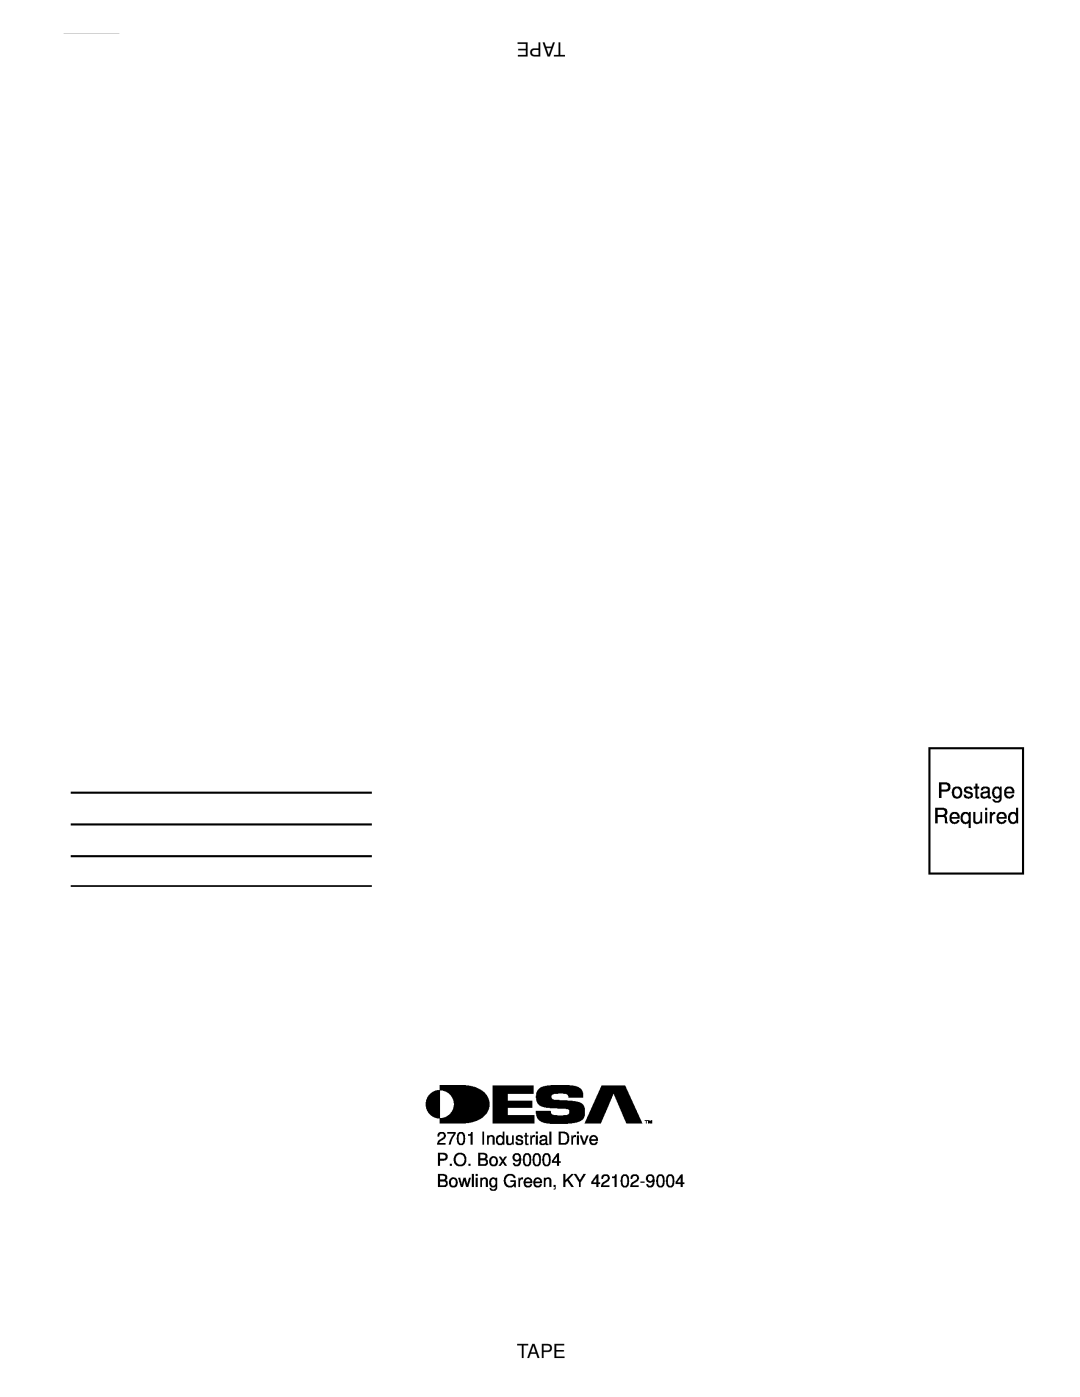 Desa CHDV36NRA installation manual Tape, Postage Required 